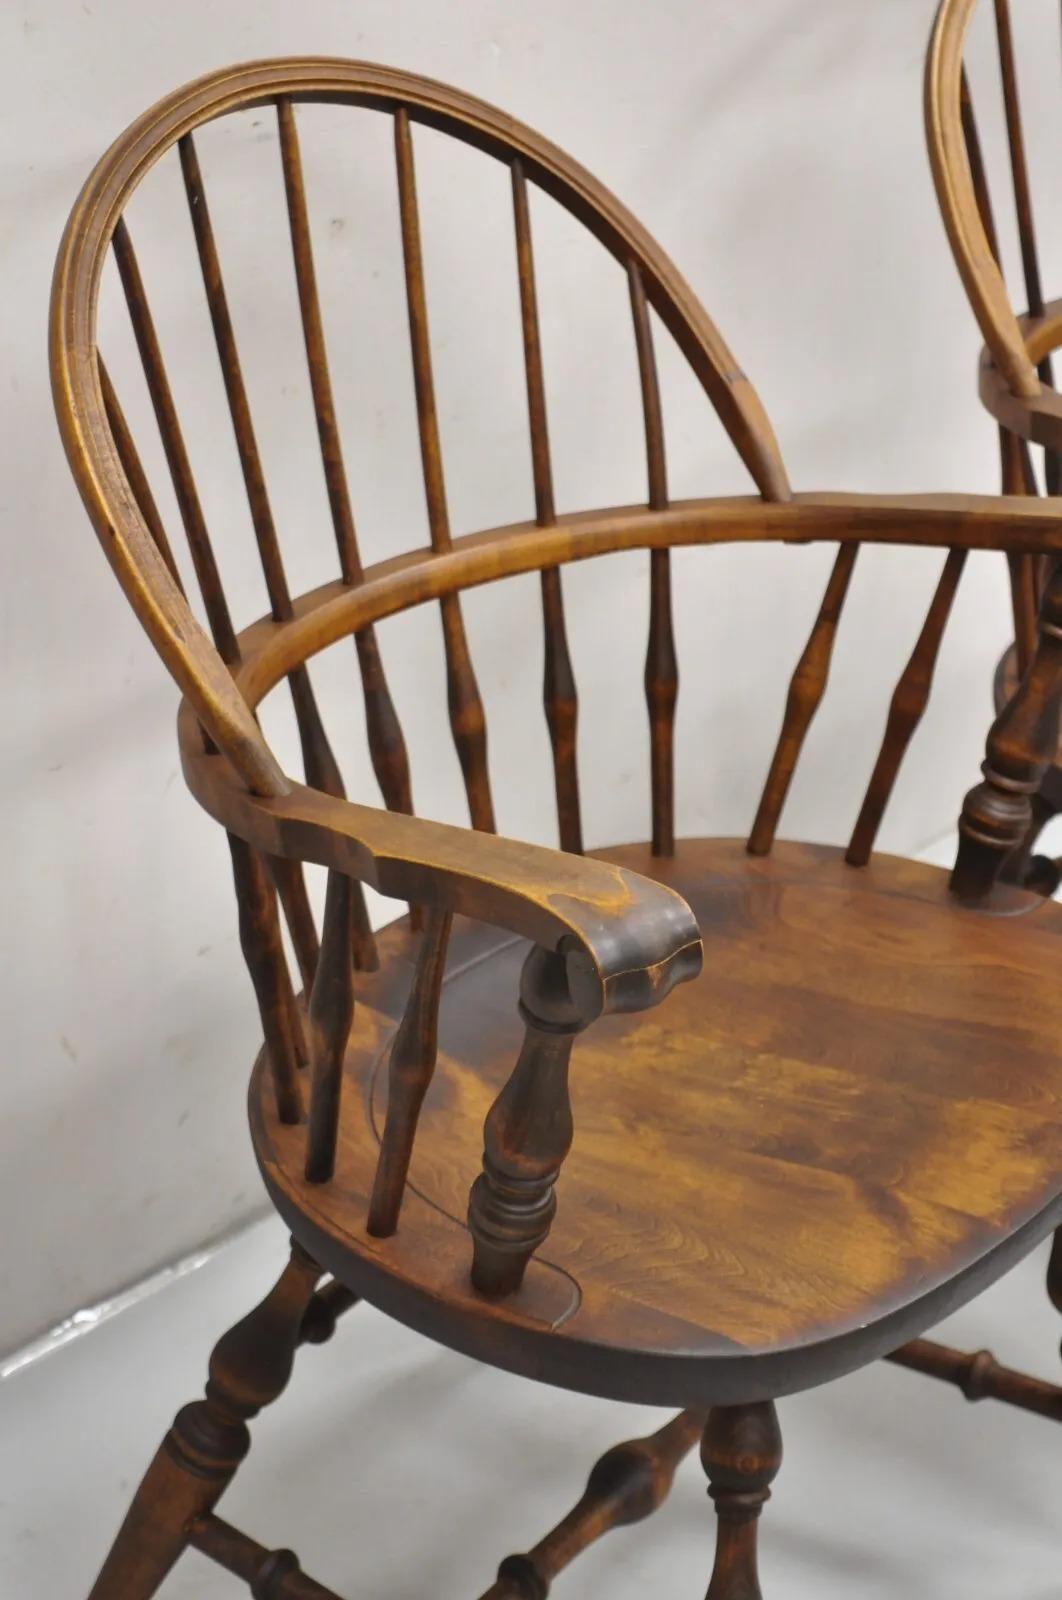 20th Century Nichols & Stone Rock Maple Wood Bowback Colonial Windsor Arm Chairs - a Pair For Sale